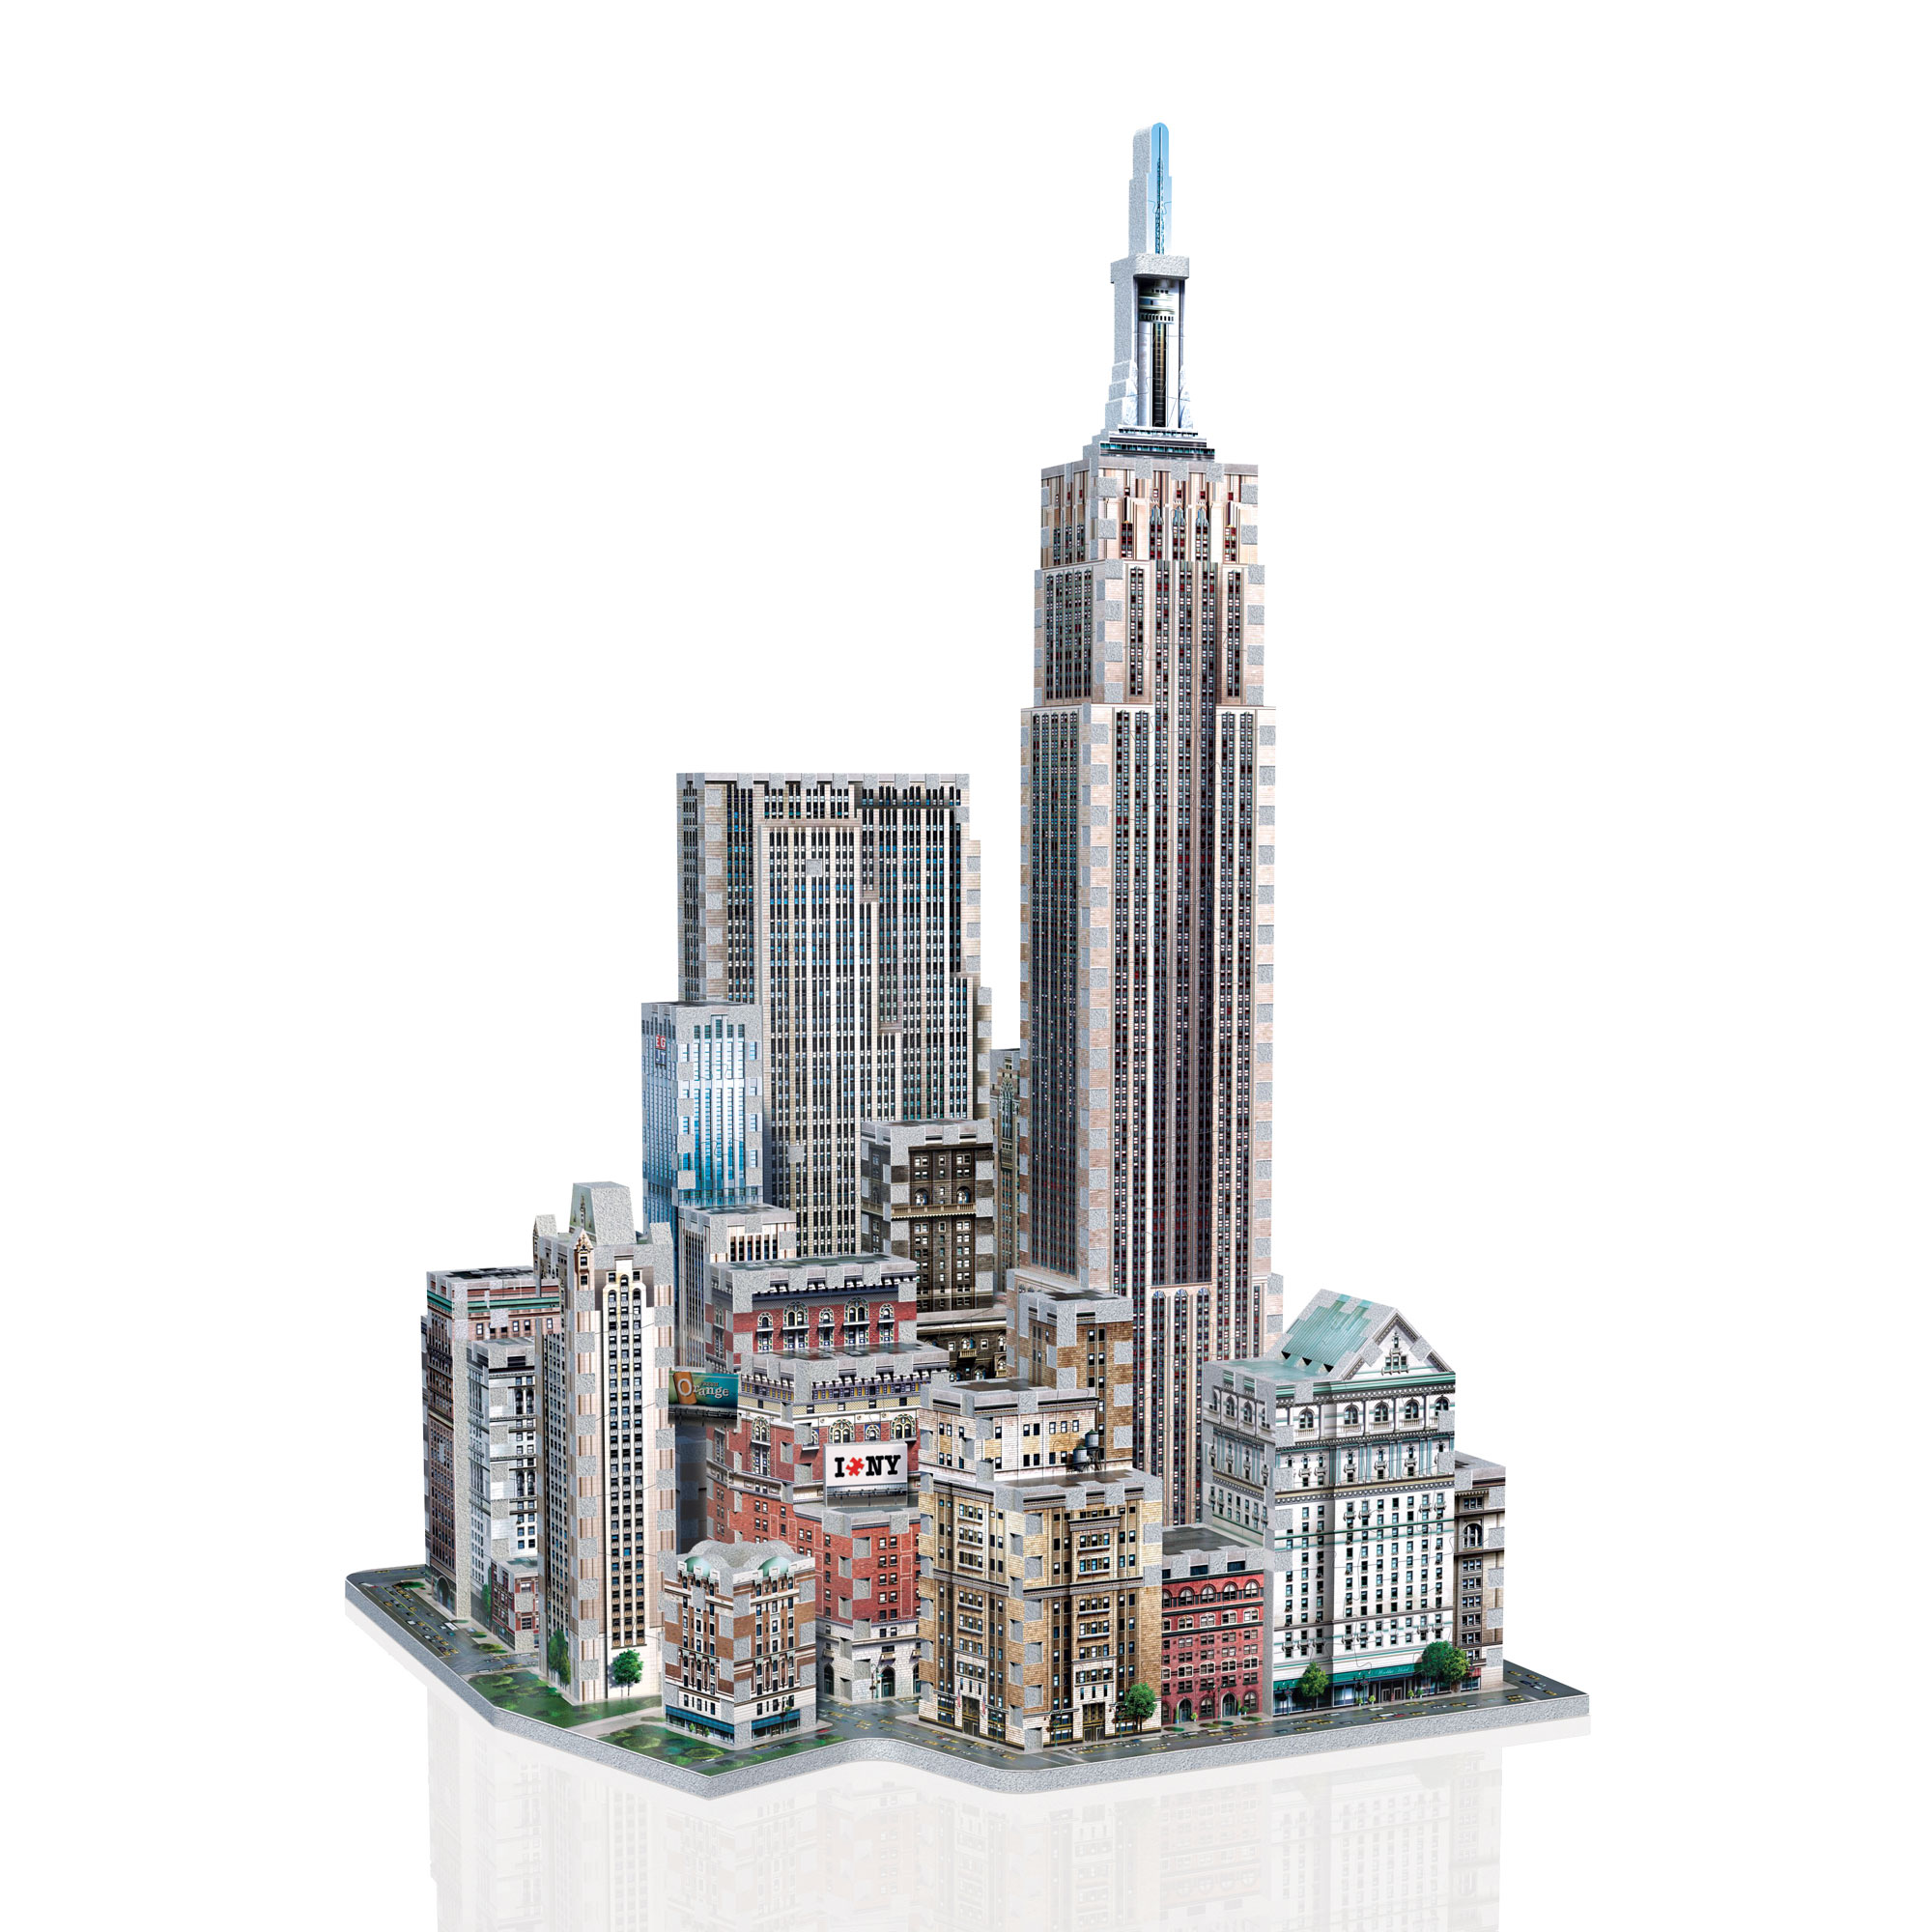 Midtown West Wrebbit 3D Jigsaw Puzzle New York Collection